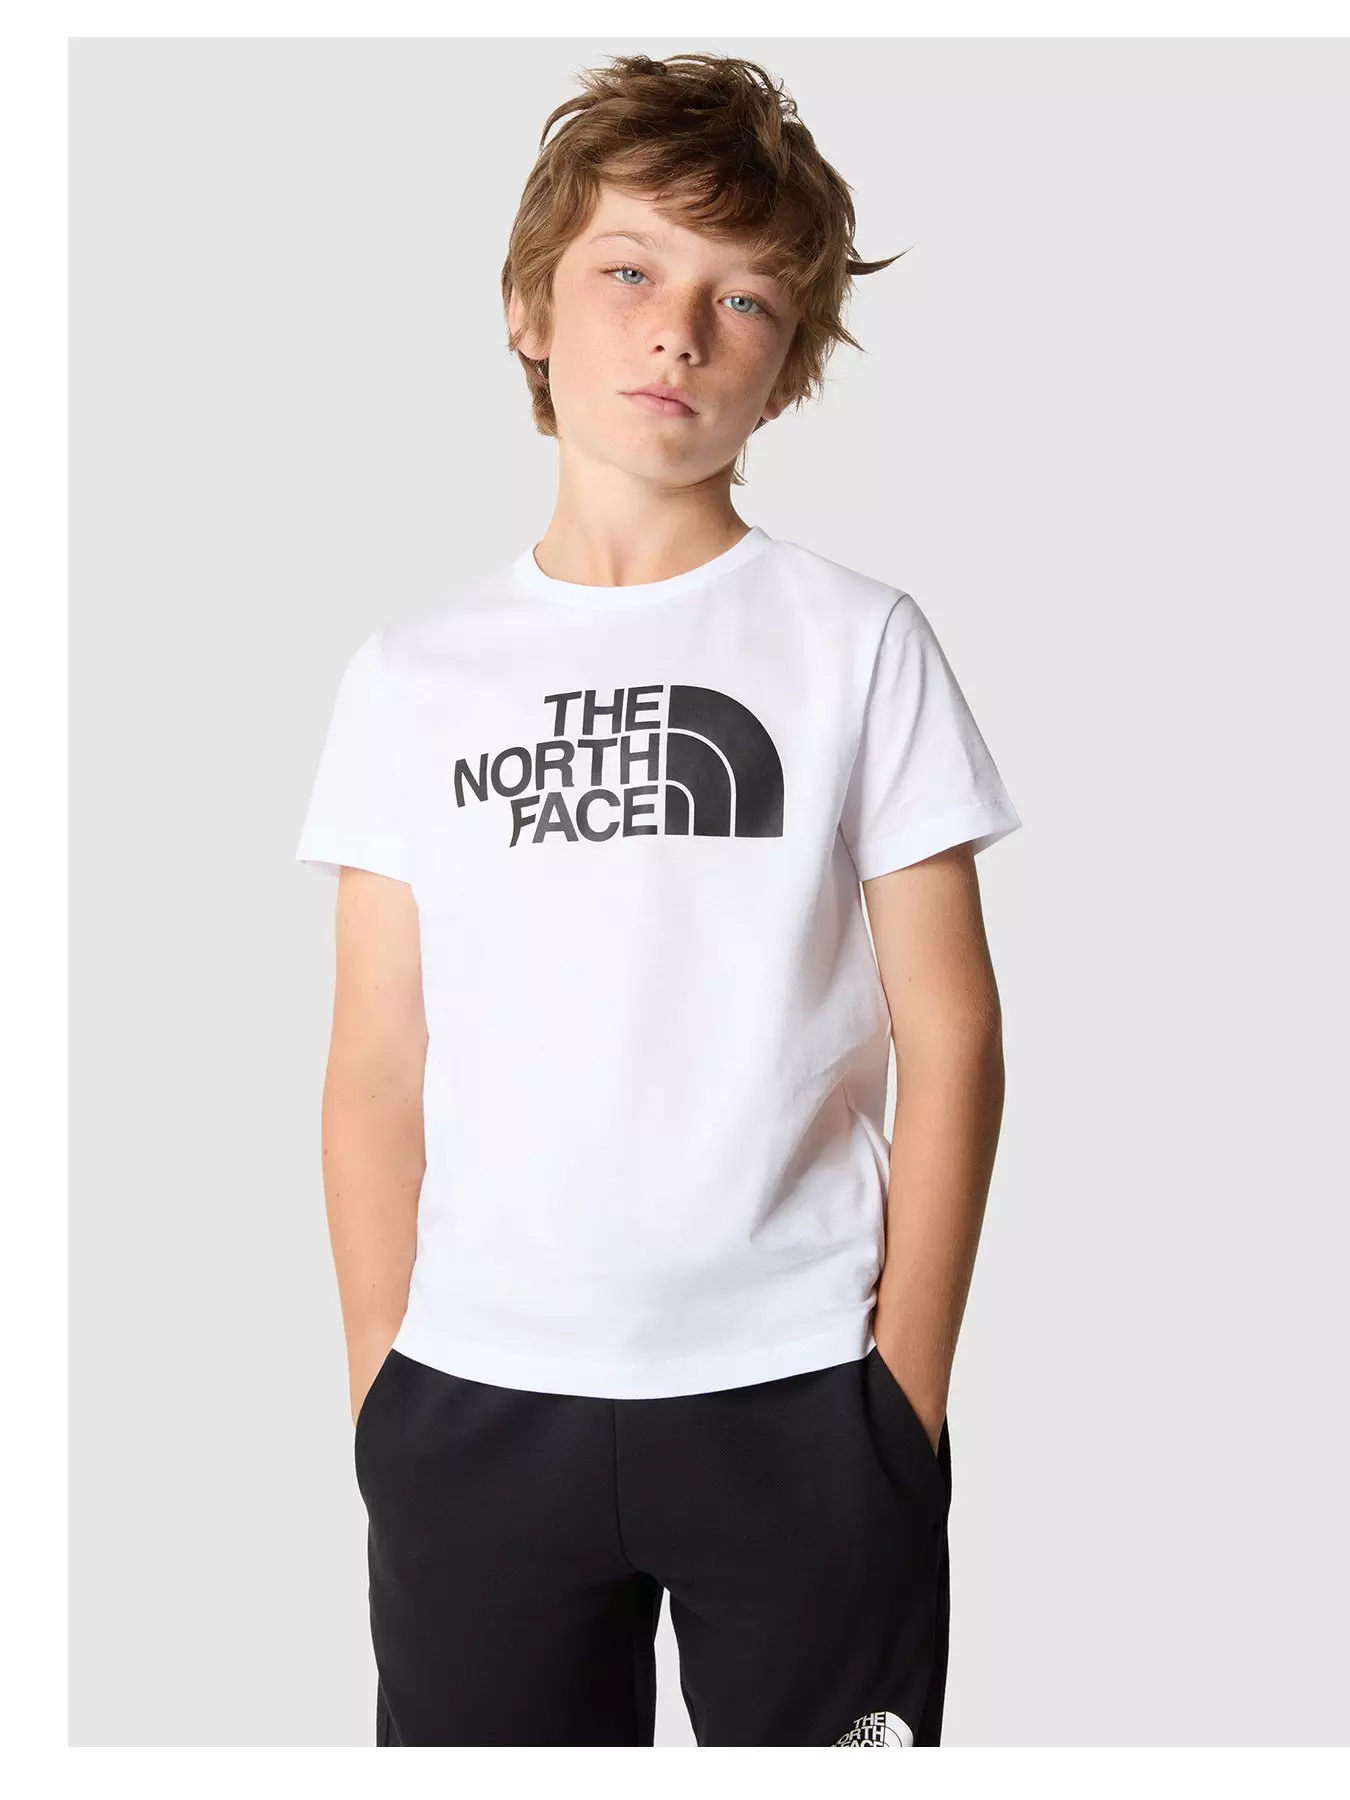 Kids North Face | infant North Face